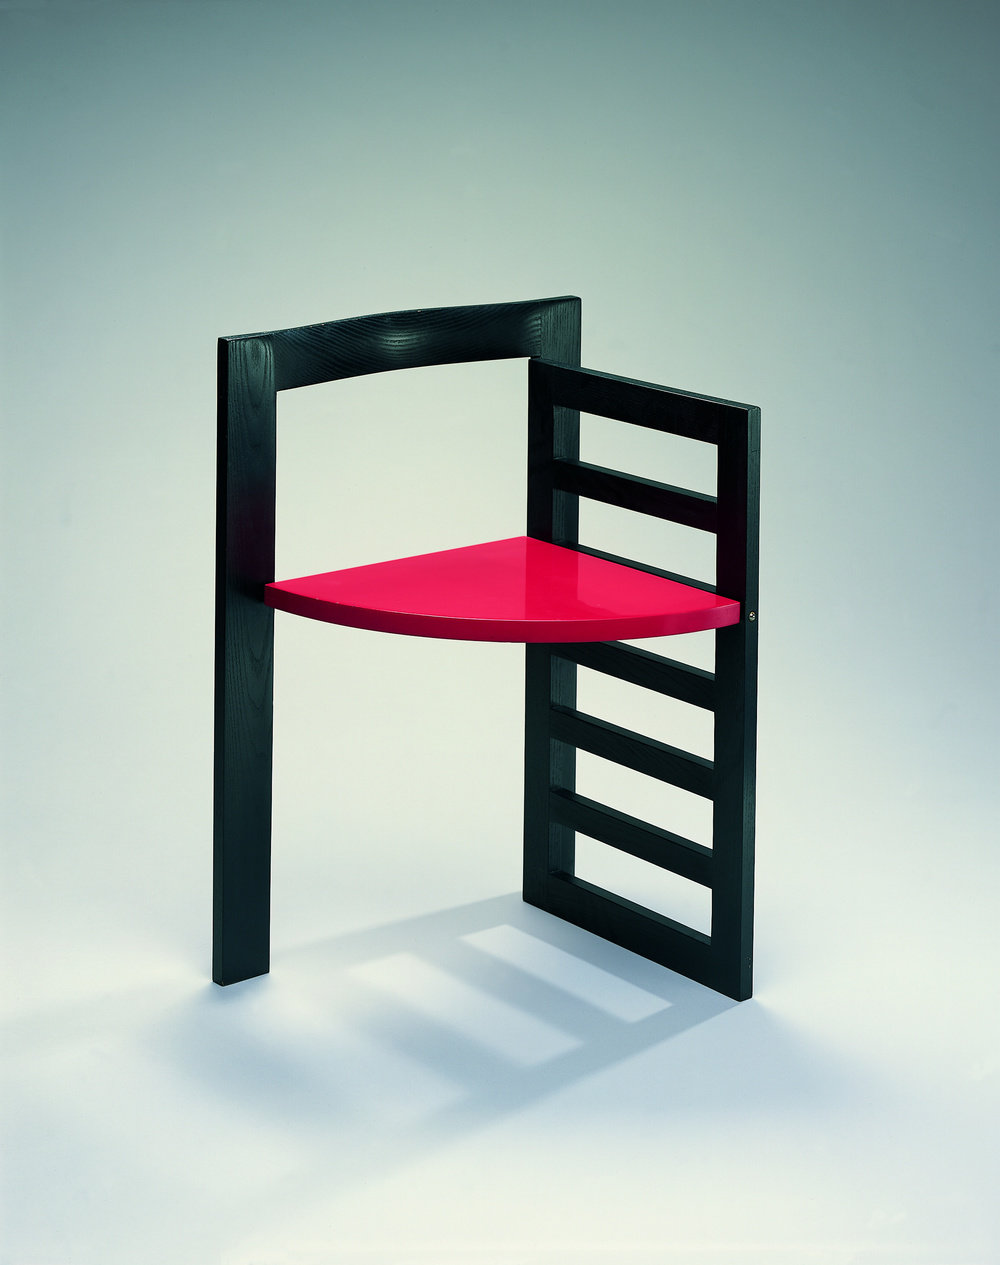 Mccoy, michael, door chair prototype, 1981, lacquered wood with metal hardware, 30.825 x 21.625 x 17 in. 78.4 x 54.9 x 43.2 cm